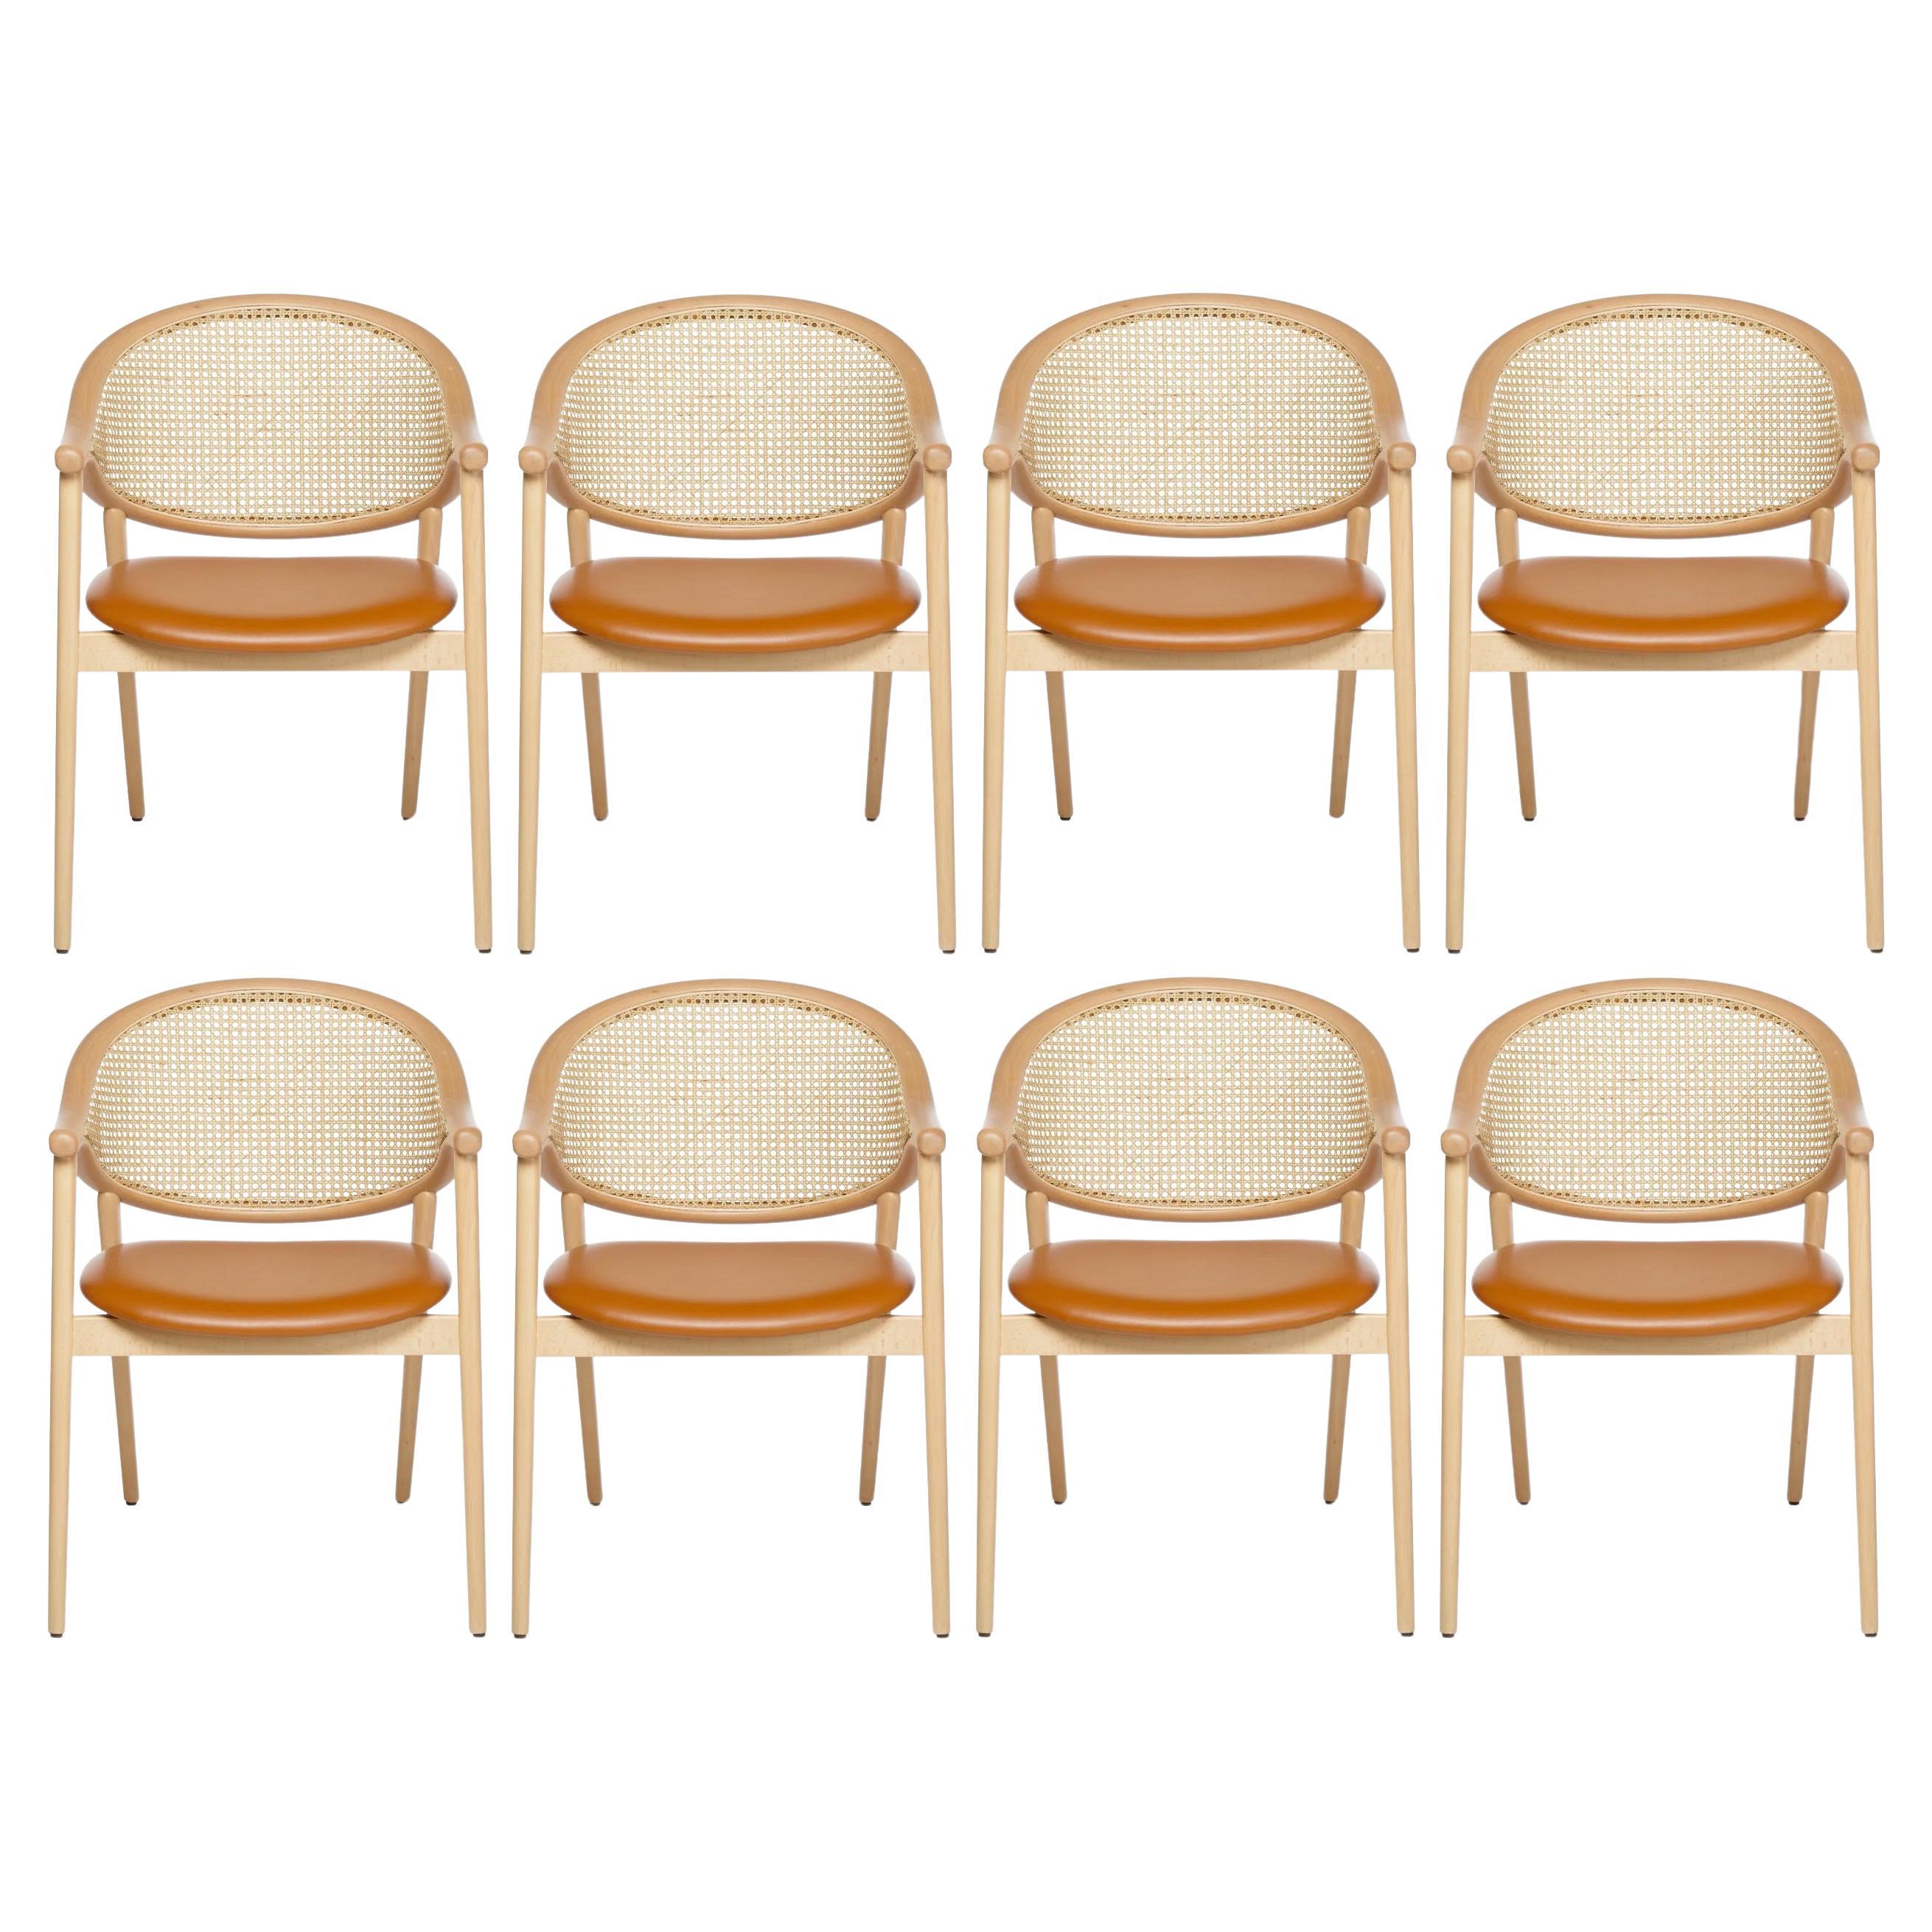 Bent Wood Dining Chair With Rattan Cane Backrest, Set of 8 For Sale